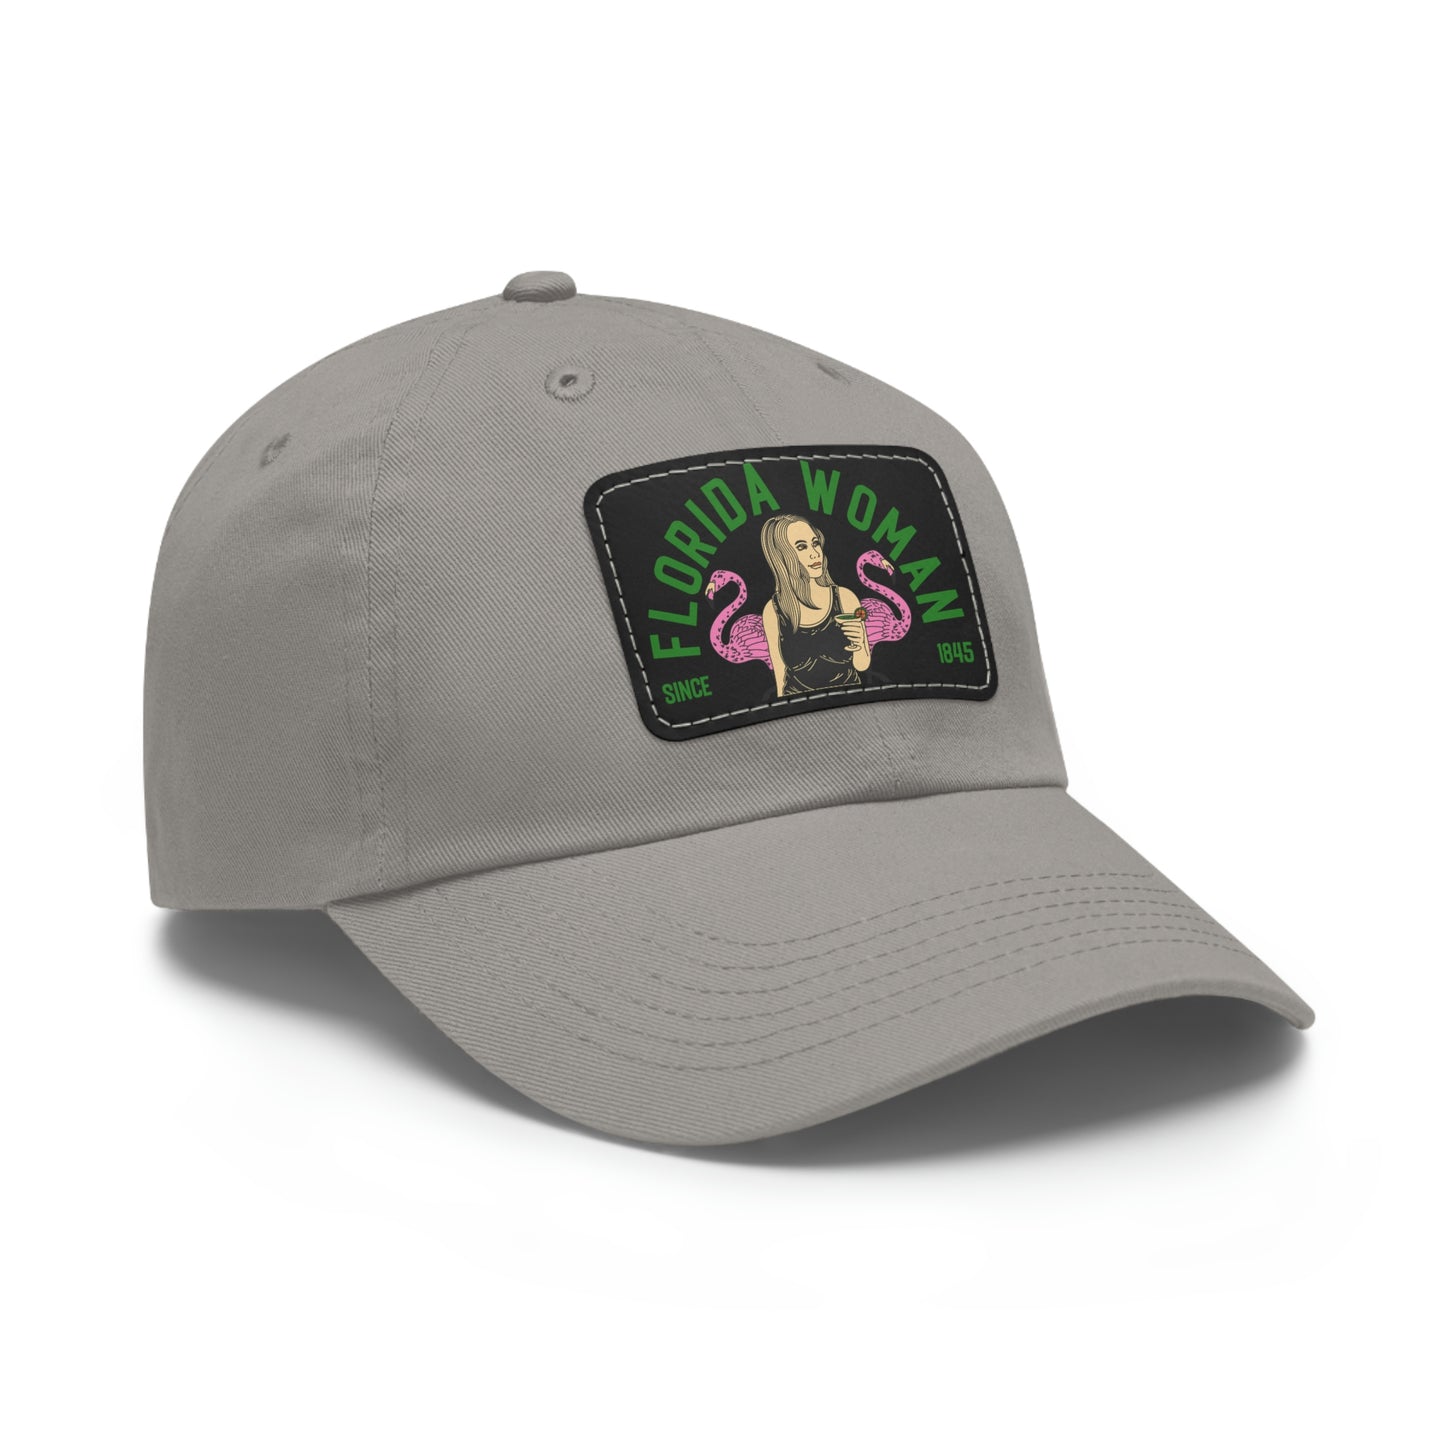 Florida Woman Boozes with Flamingos - Dad Hat with Leather Patch